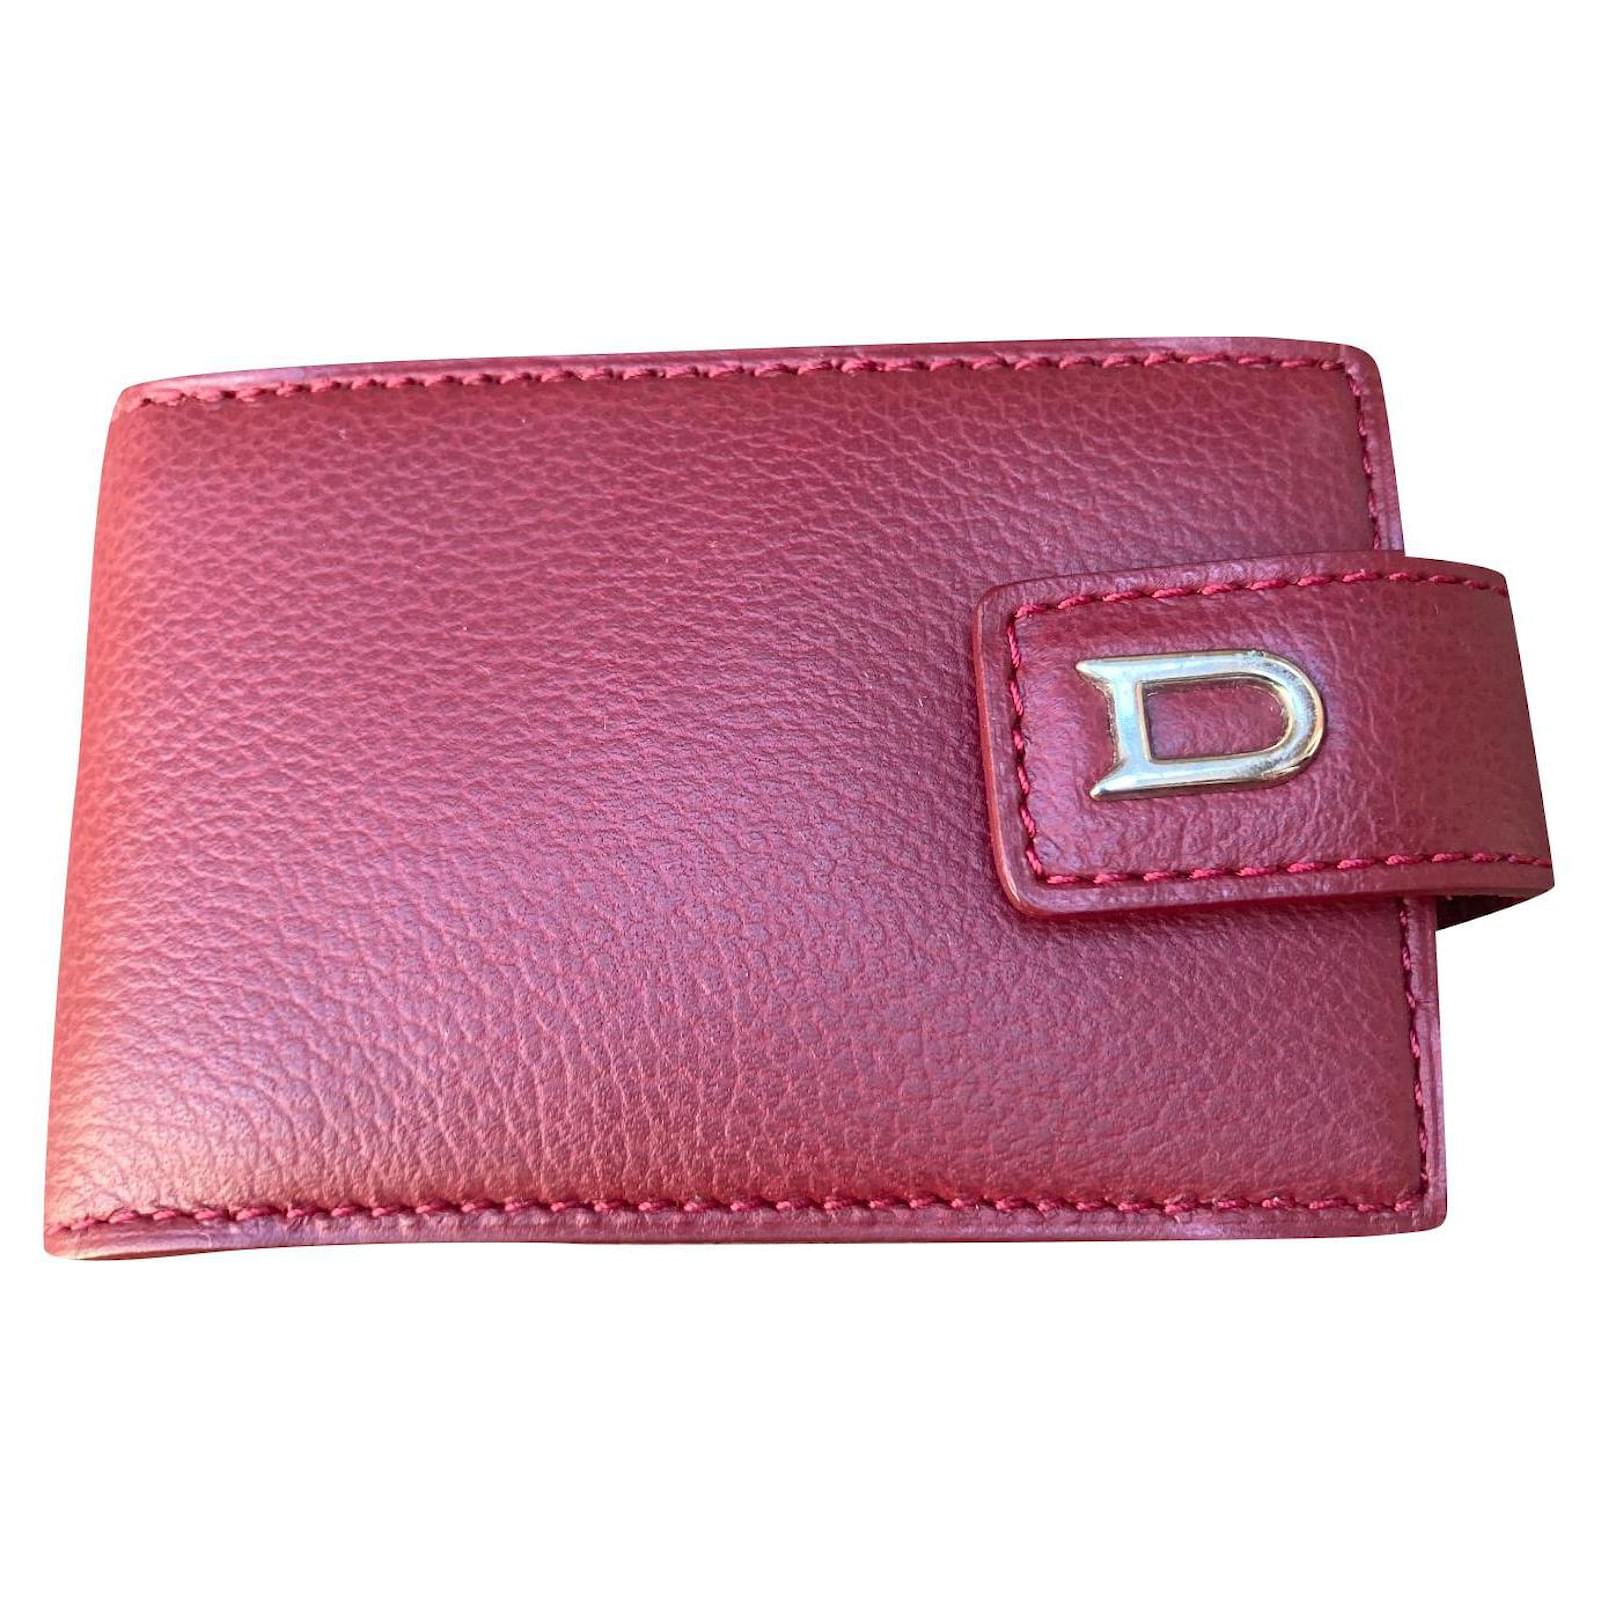 Delvaux Leather Colorblock Pattern Card Holder - Burgundy Wallets,  Accessories - DVX22767